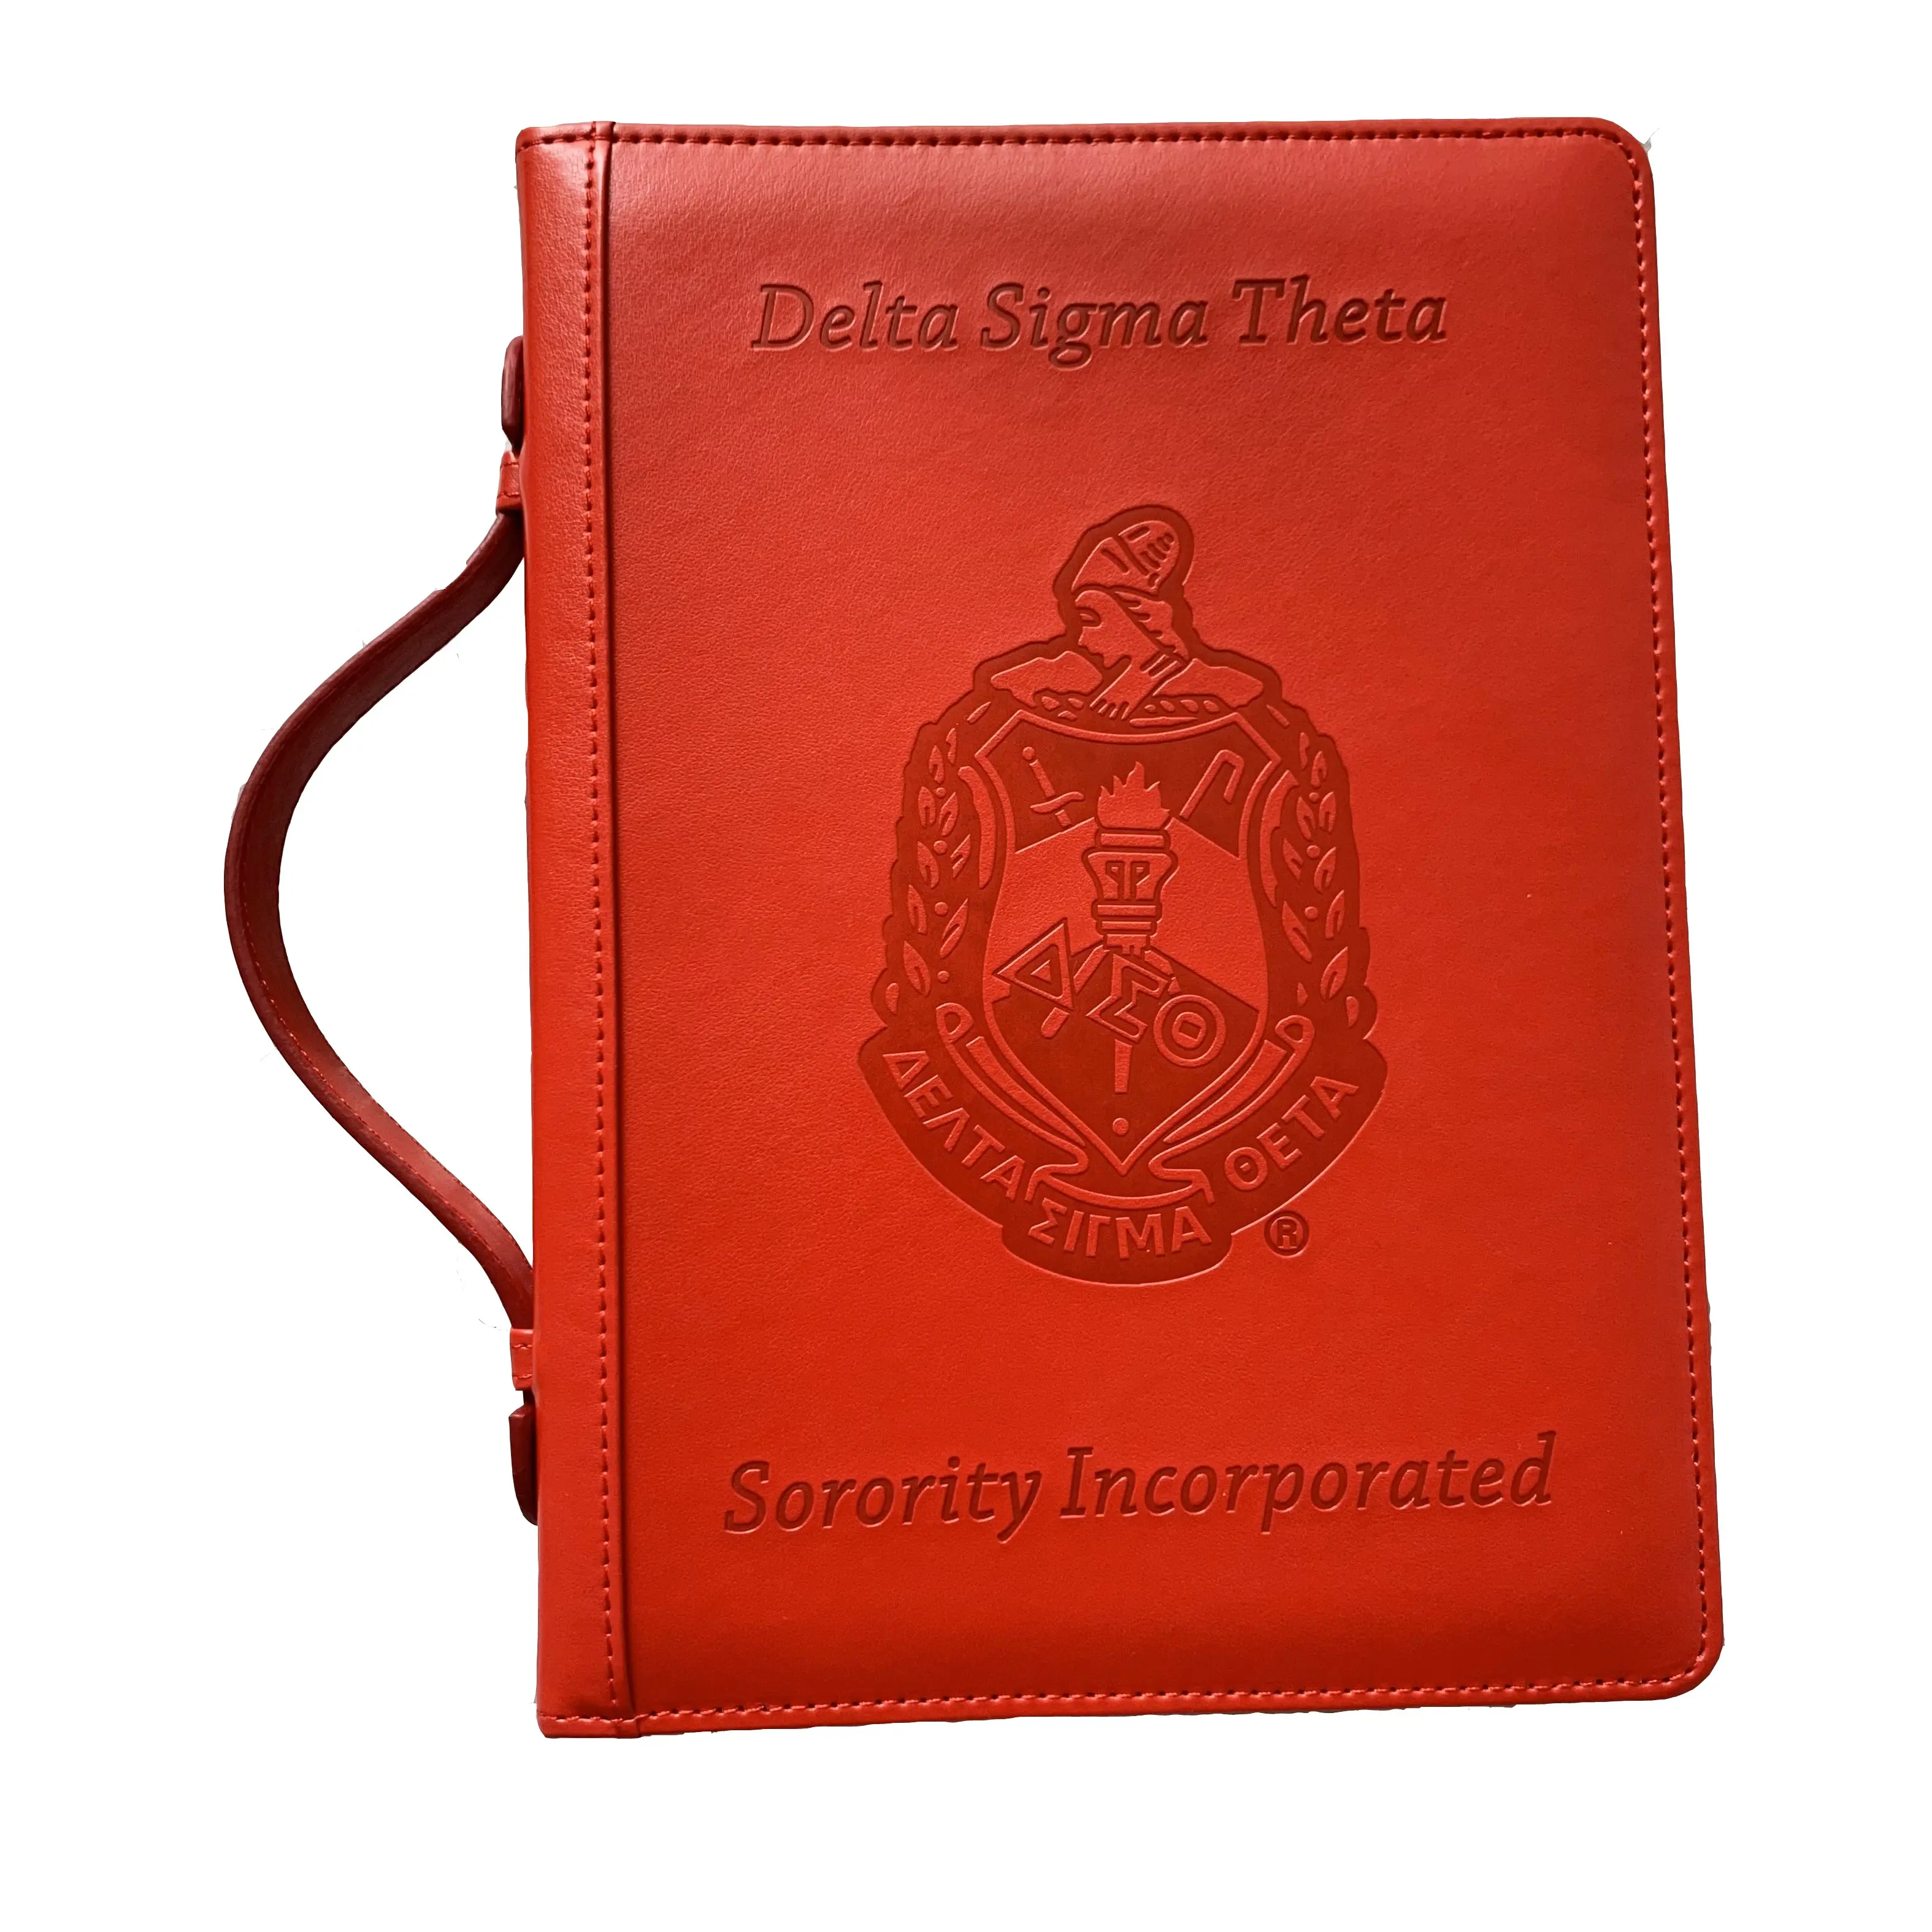 All Greek Groups Sorority Fraternity Delta Red Embossed Leather Ritual Book Covers